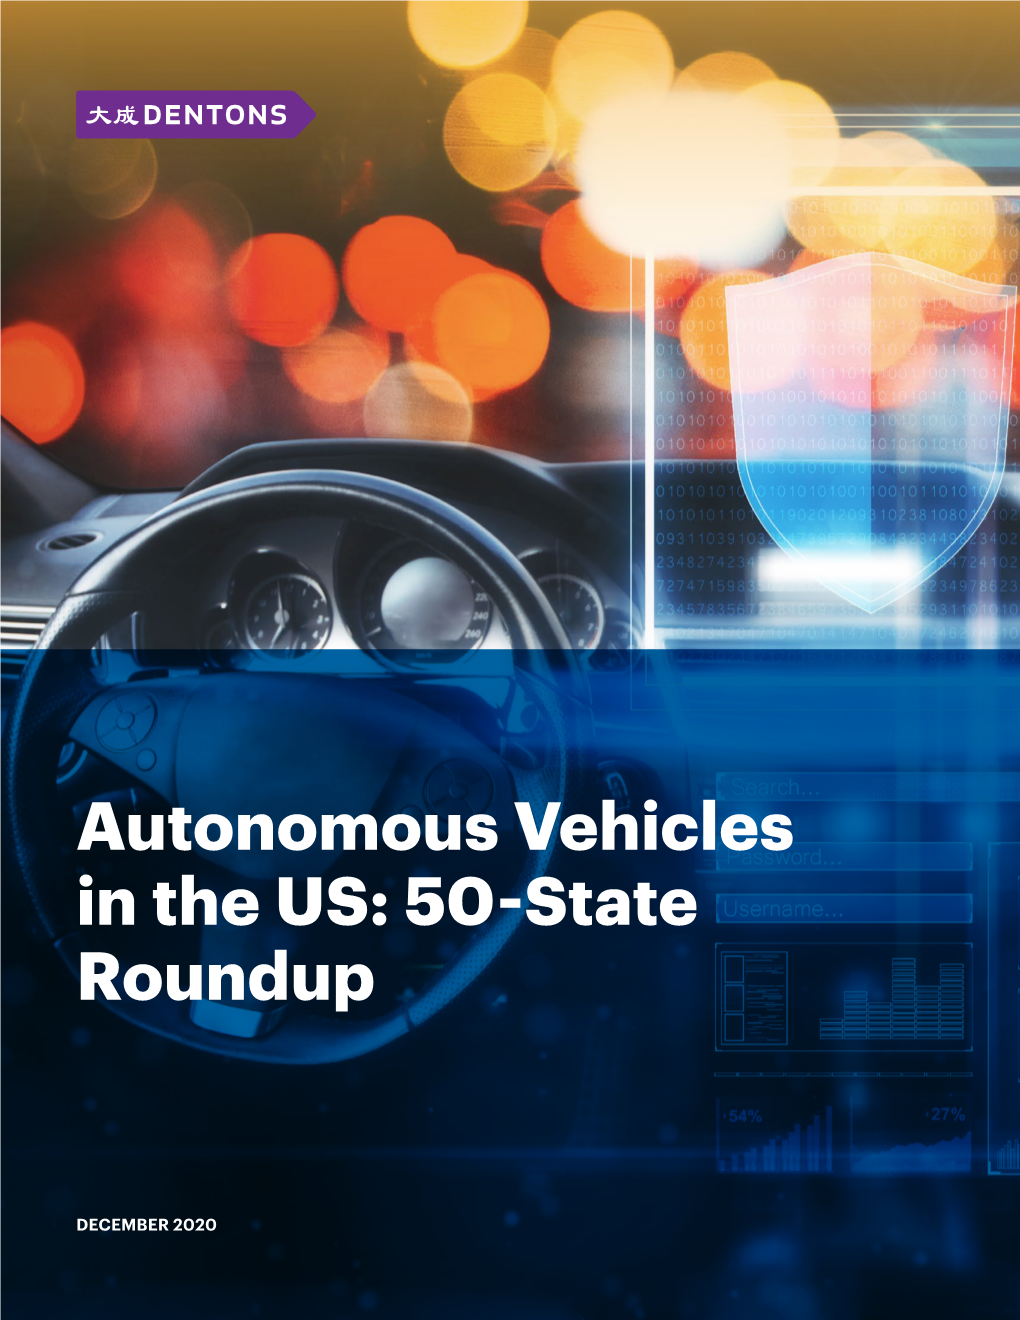 Autonomous Vehicles in the US: 50-State Roundup